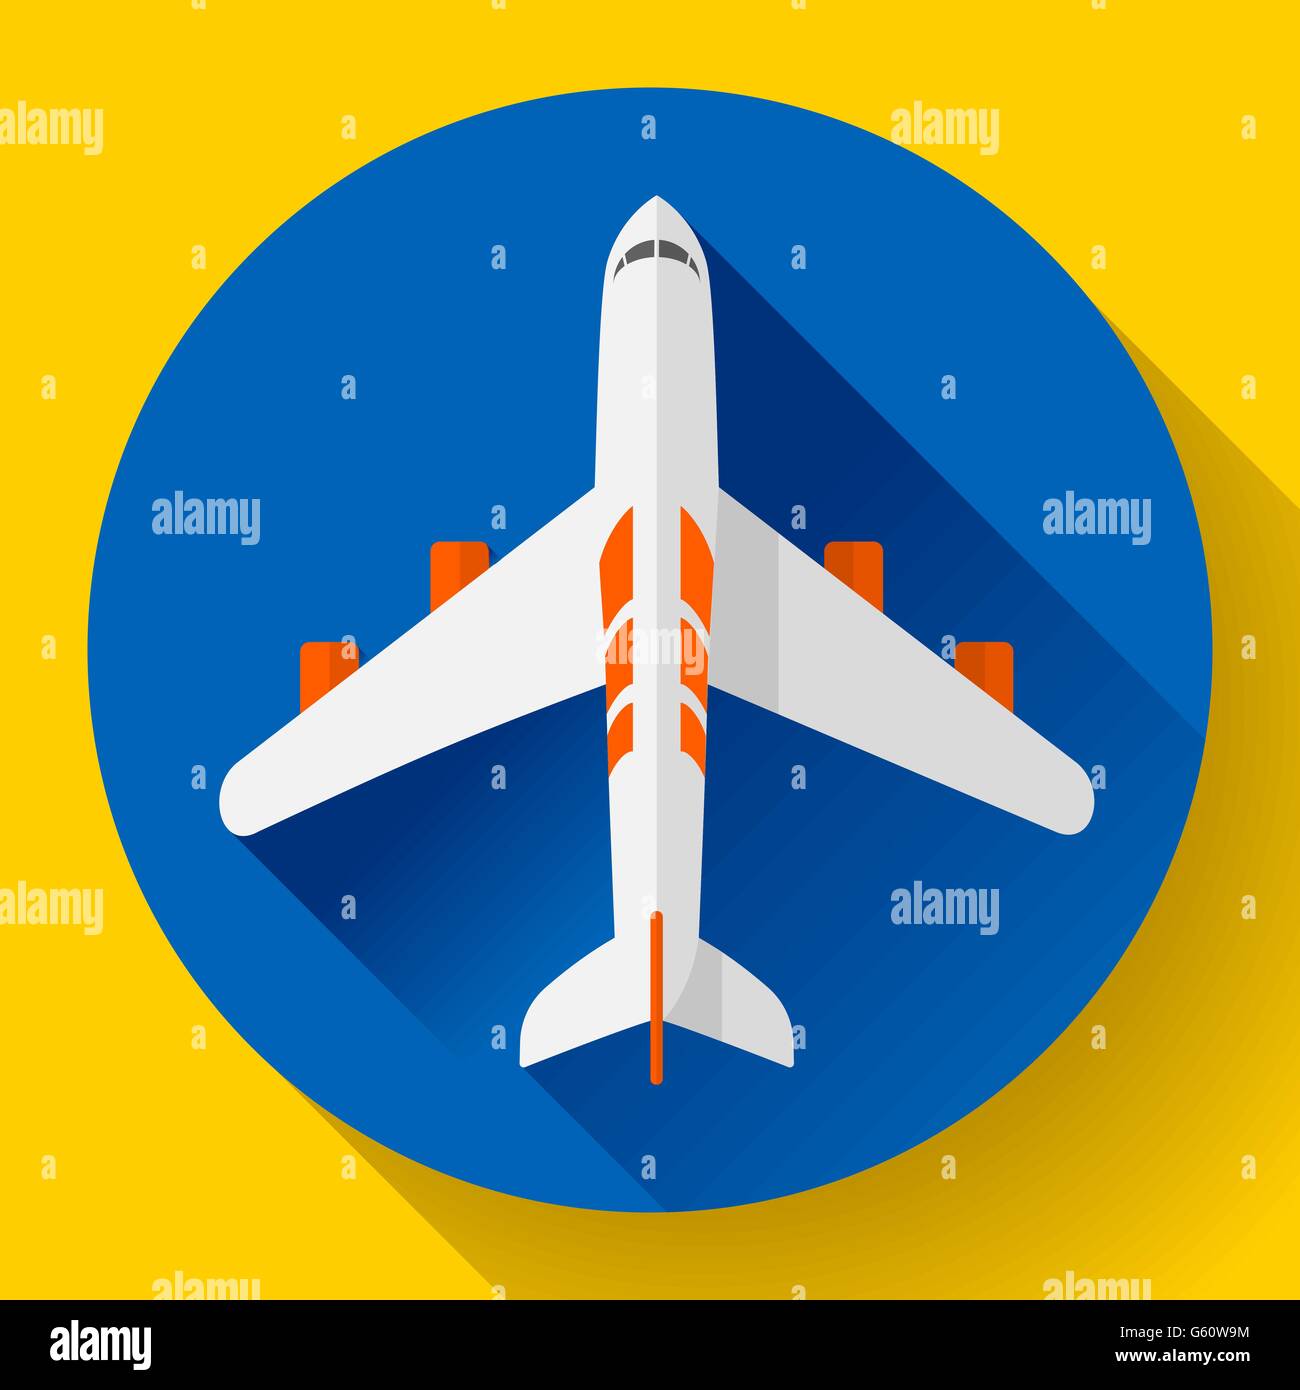 Airplane - vector icon illustration. Flat design style. Stock Vector